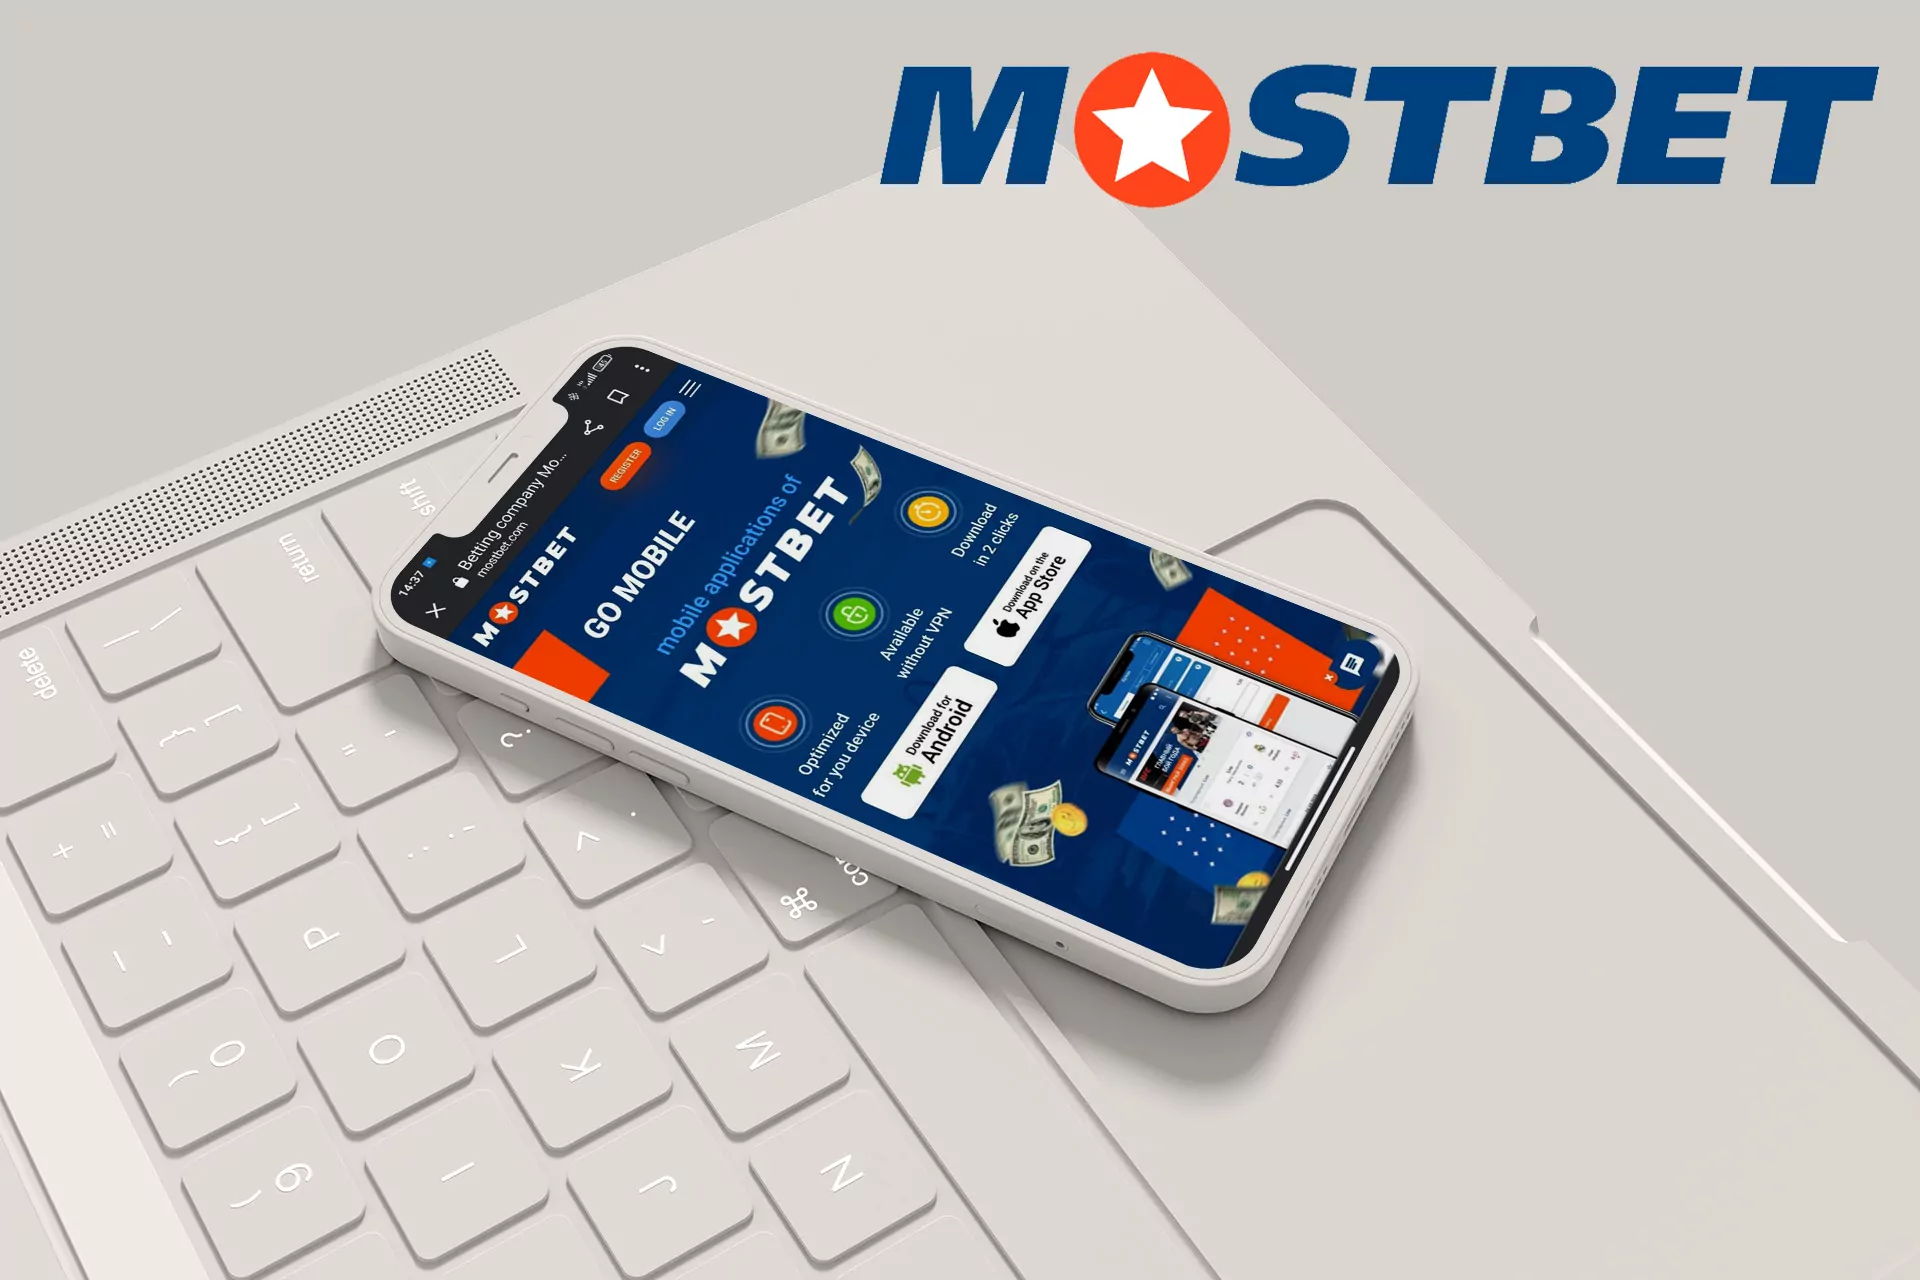 Mostbet Betting and Casino in Tunisia - Play and win big prizes Services - How To Do It Right